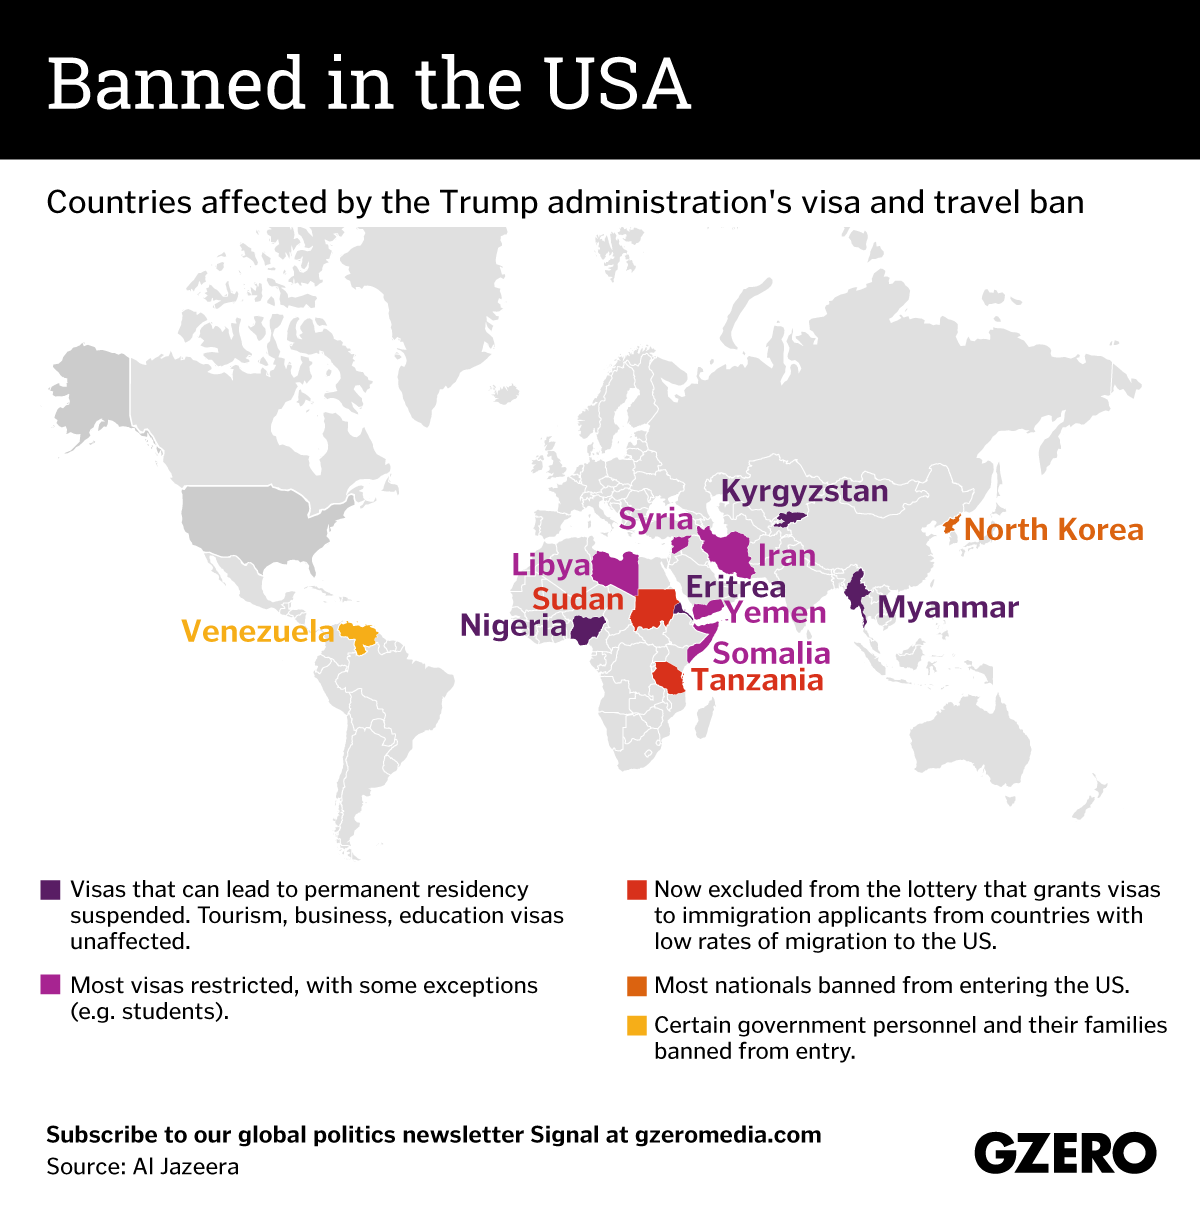 The Graphic Truth: Banned in the USA